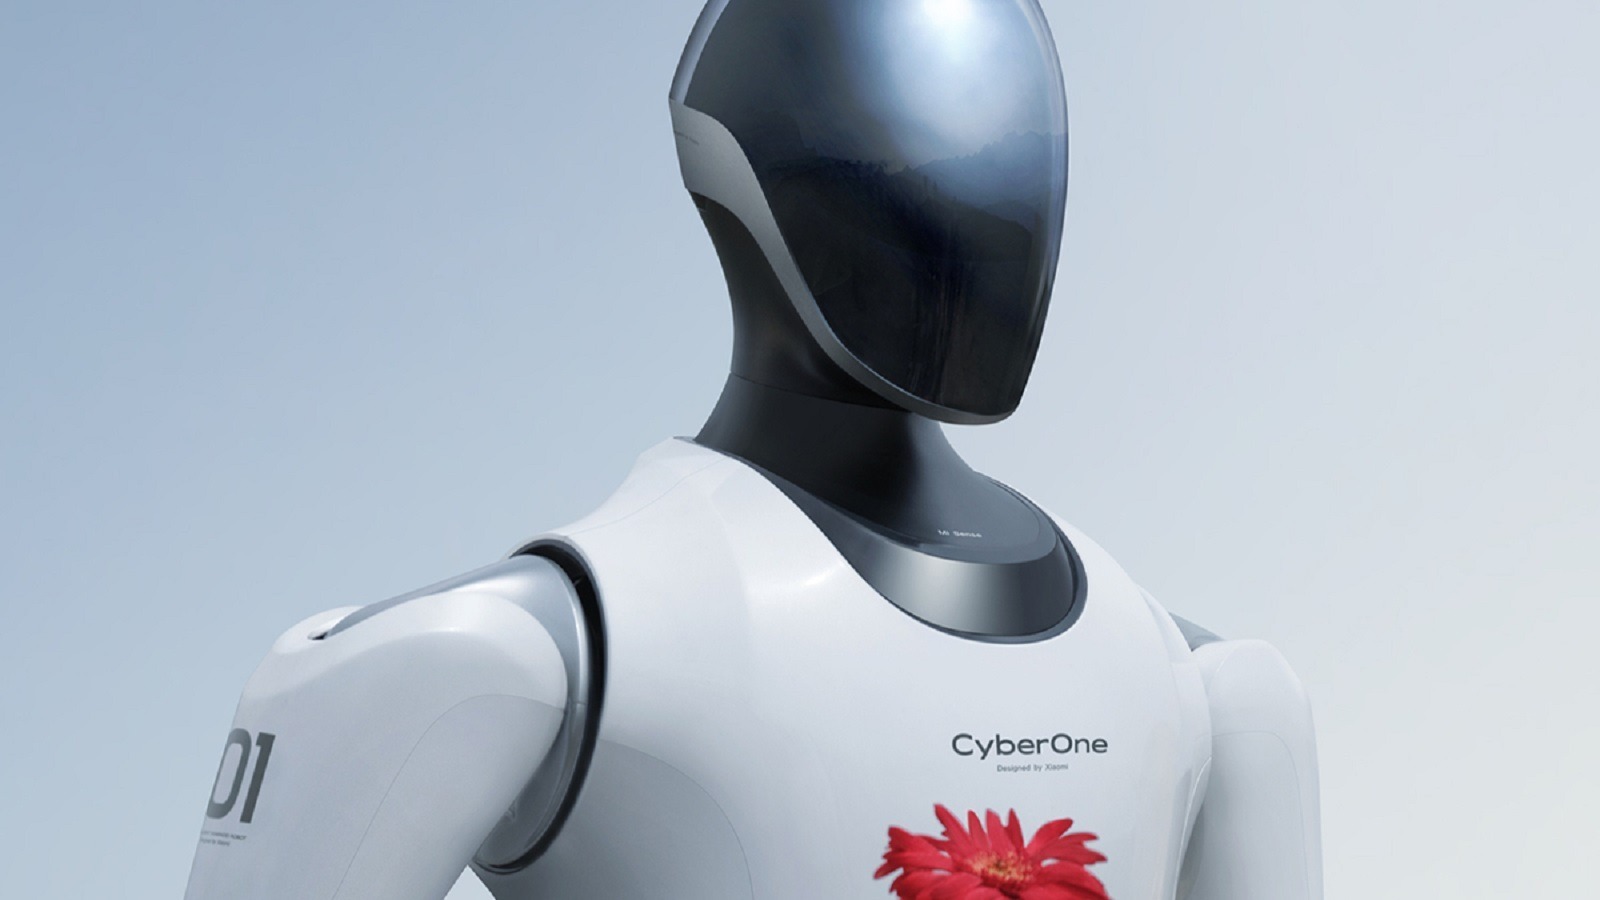 xiaomi-cyberone-robot-revealed-to-give-tesla-bot-a-humanoid-rival